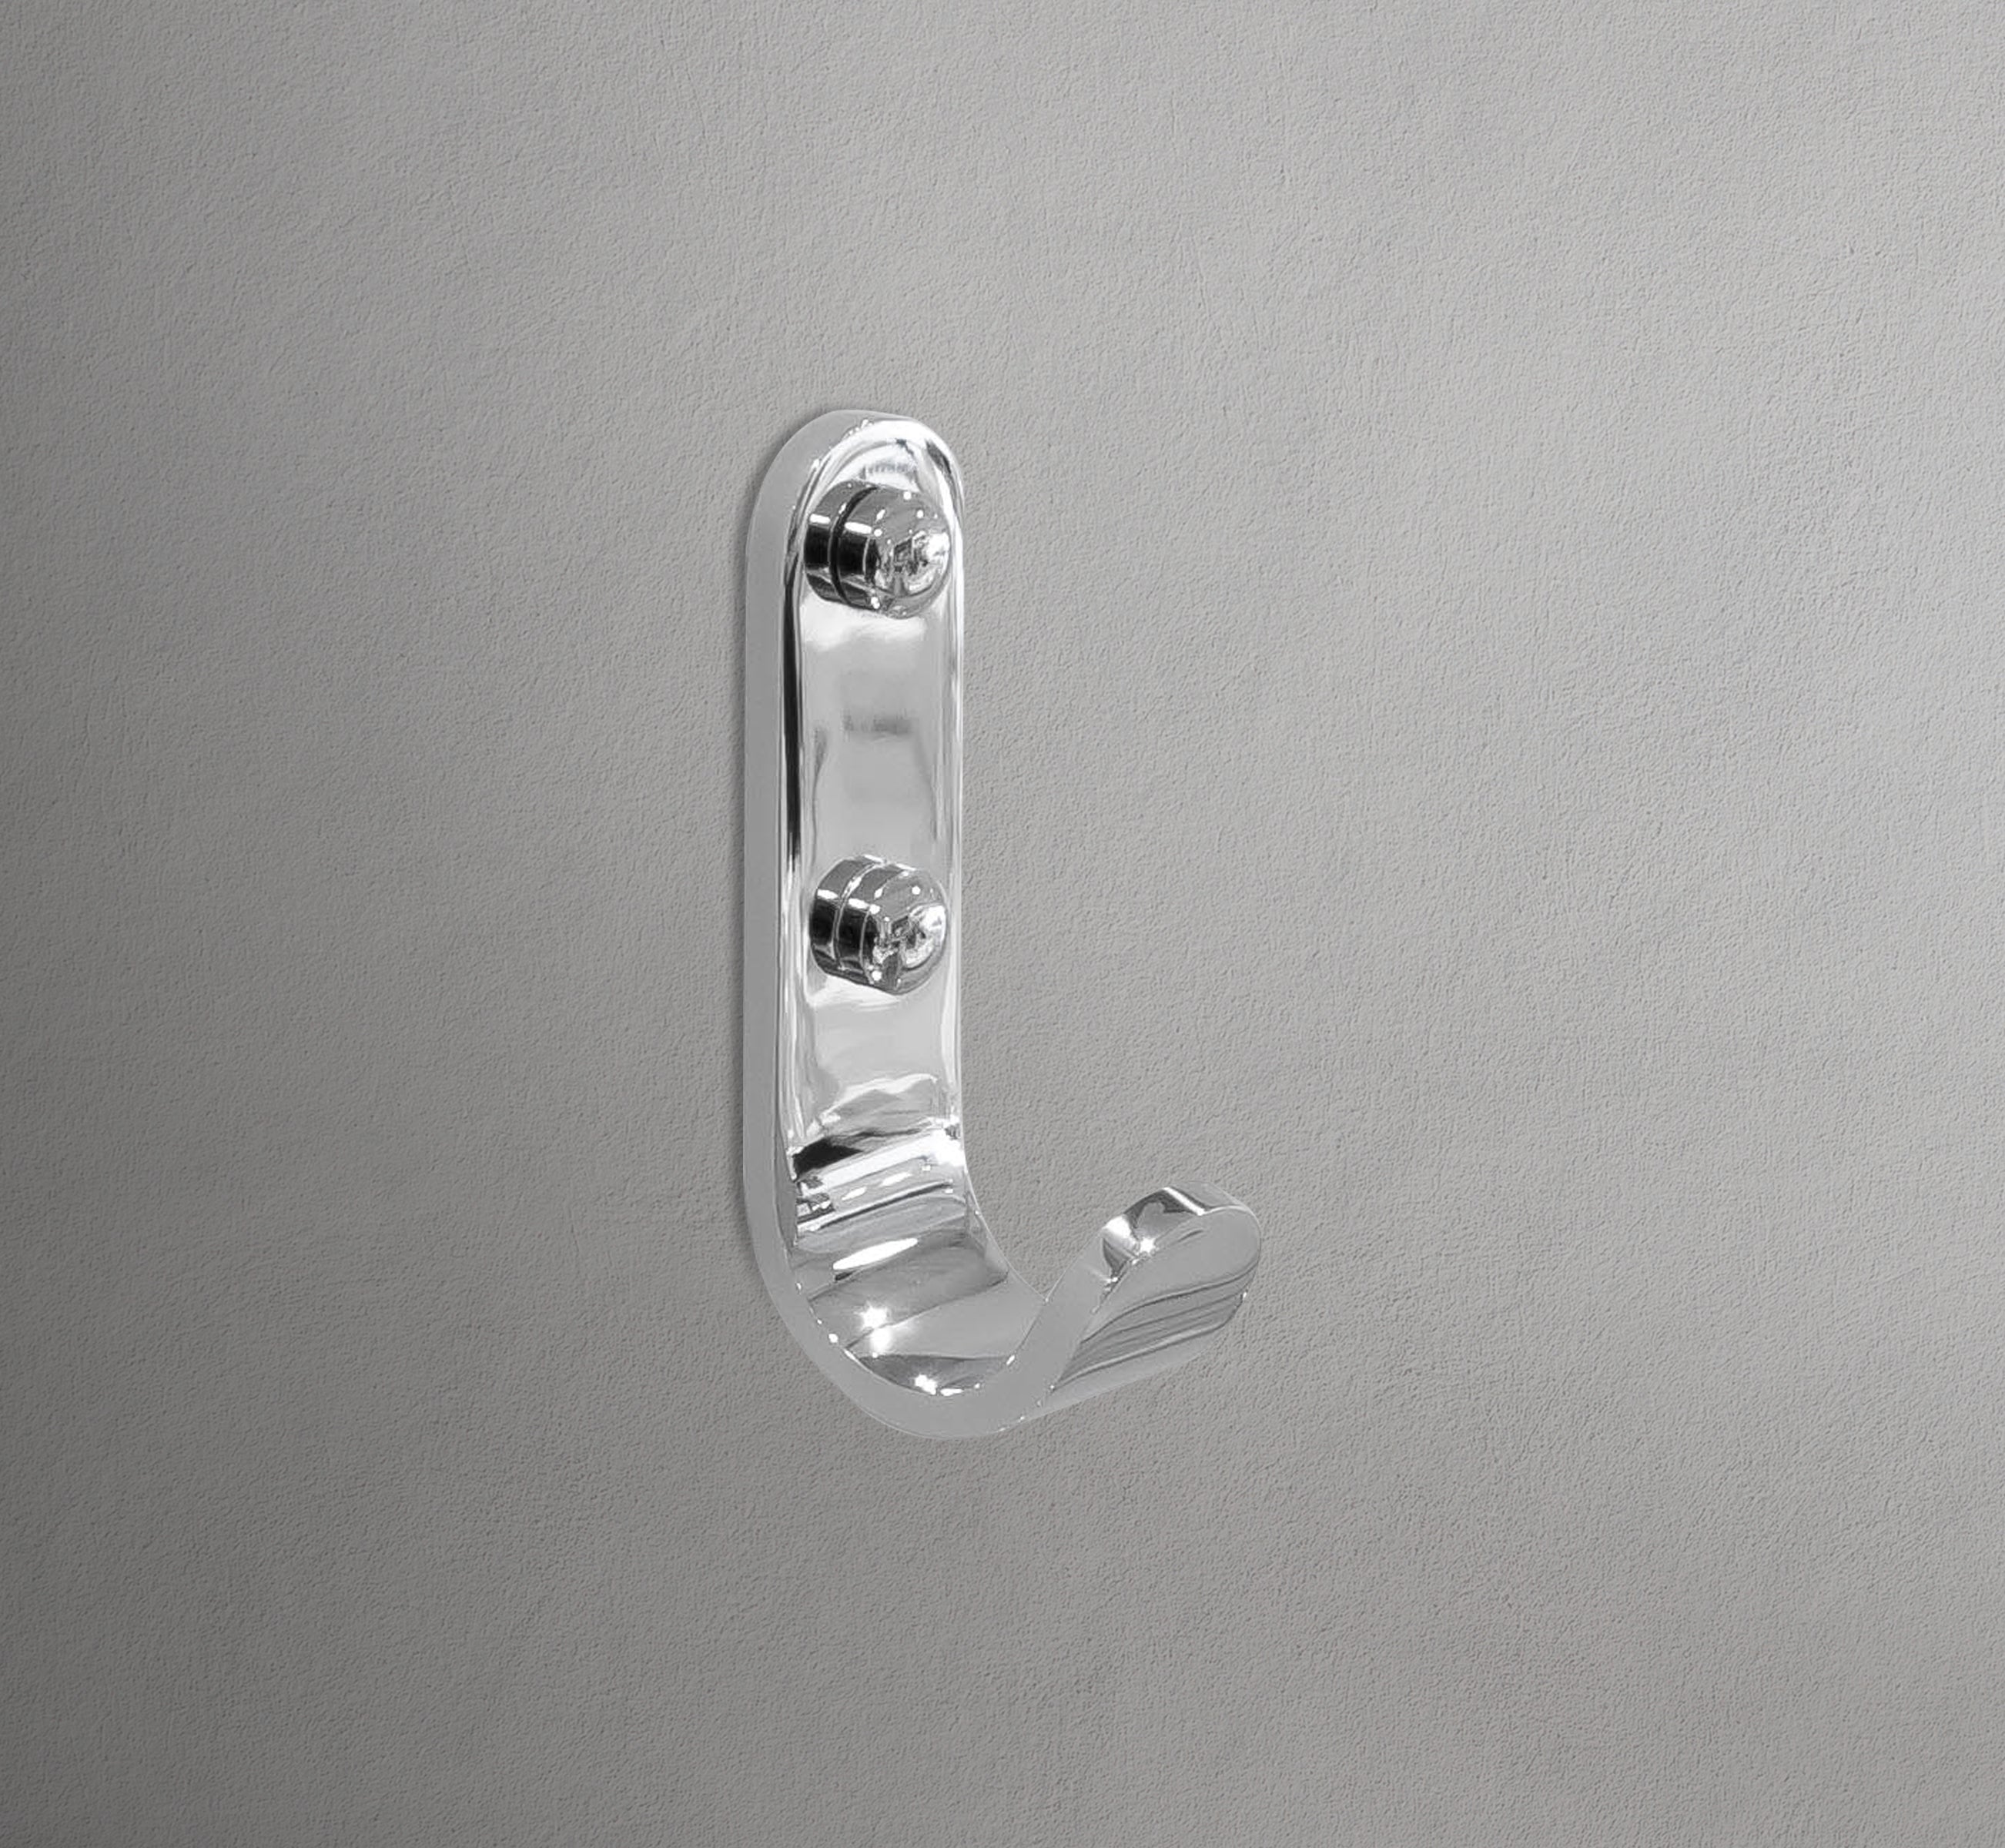 AC 3201 robe hook overview